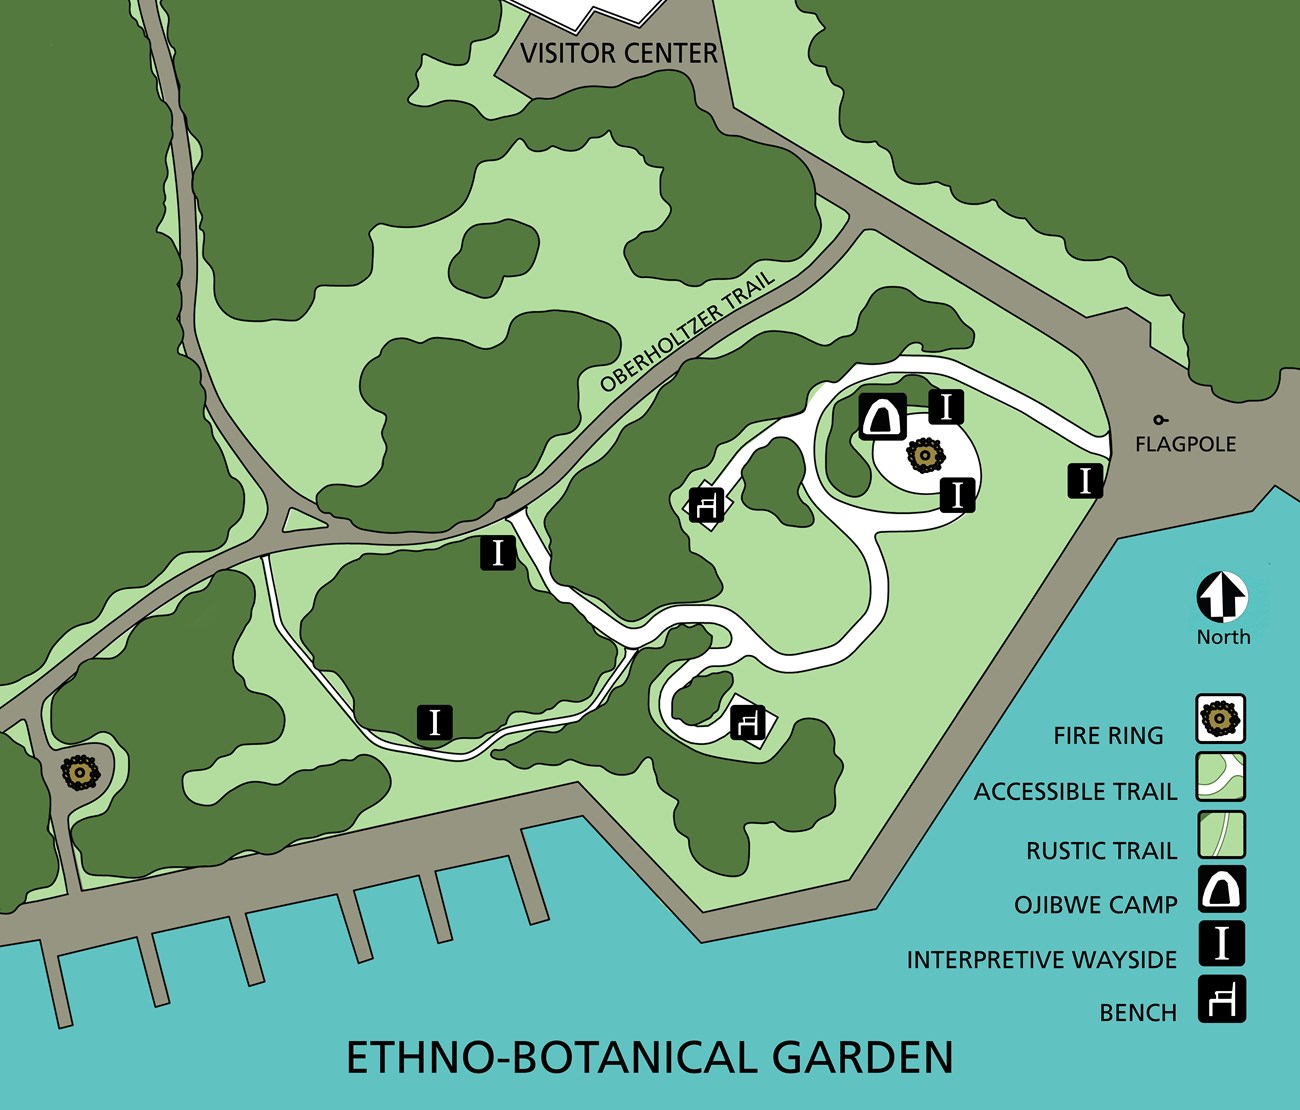 A map of the ethnobotanical garden. It shows bench locations, the ojibwe encampment site, and where the garden is in realtion to the Rainy Lake visitor center.